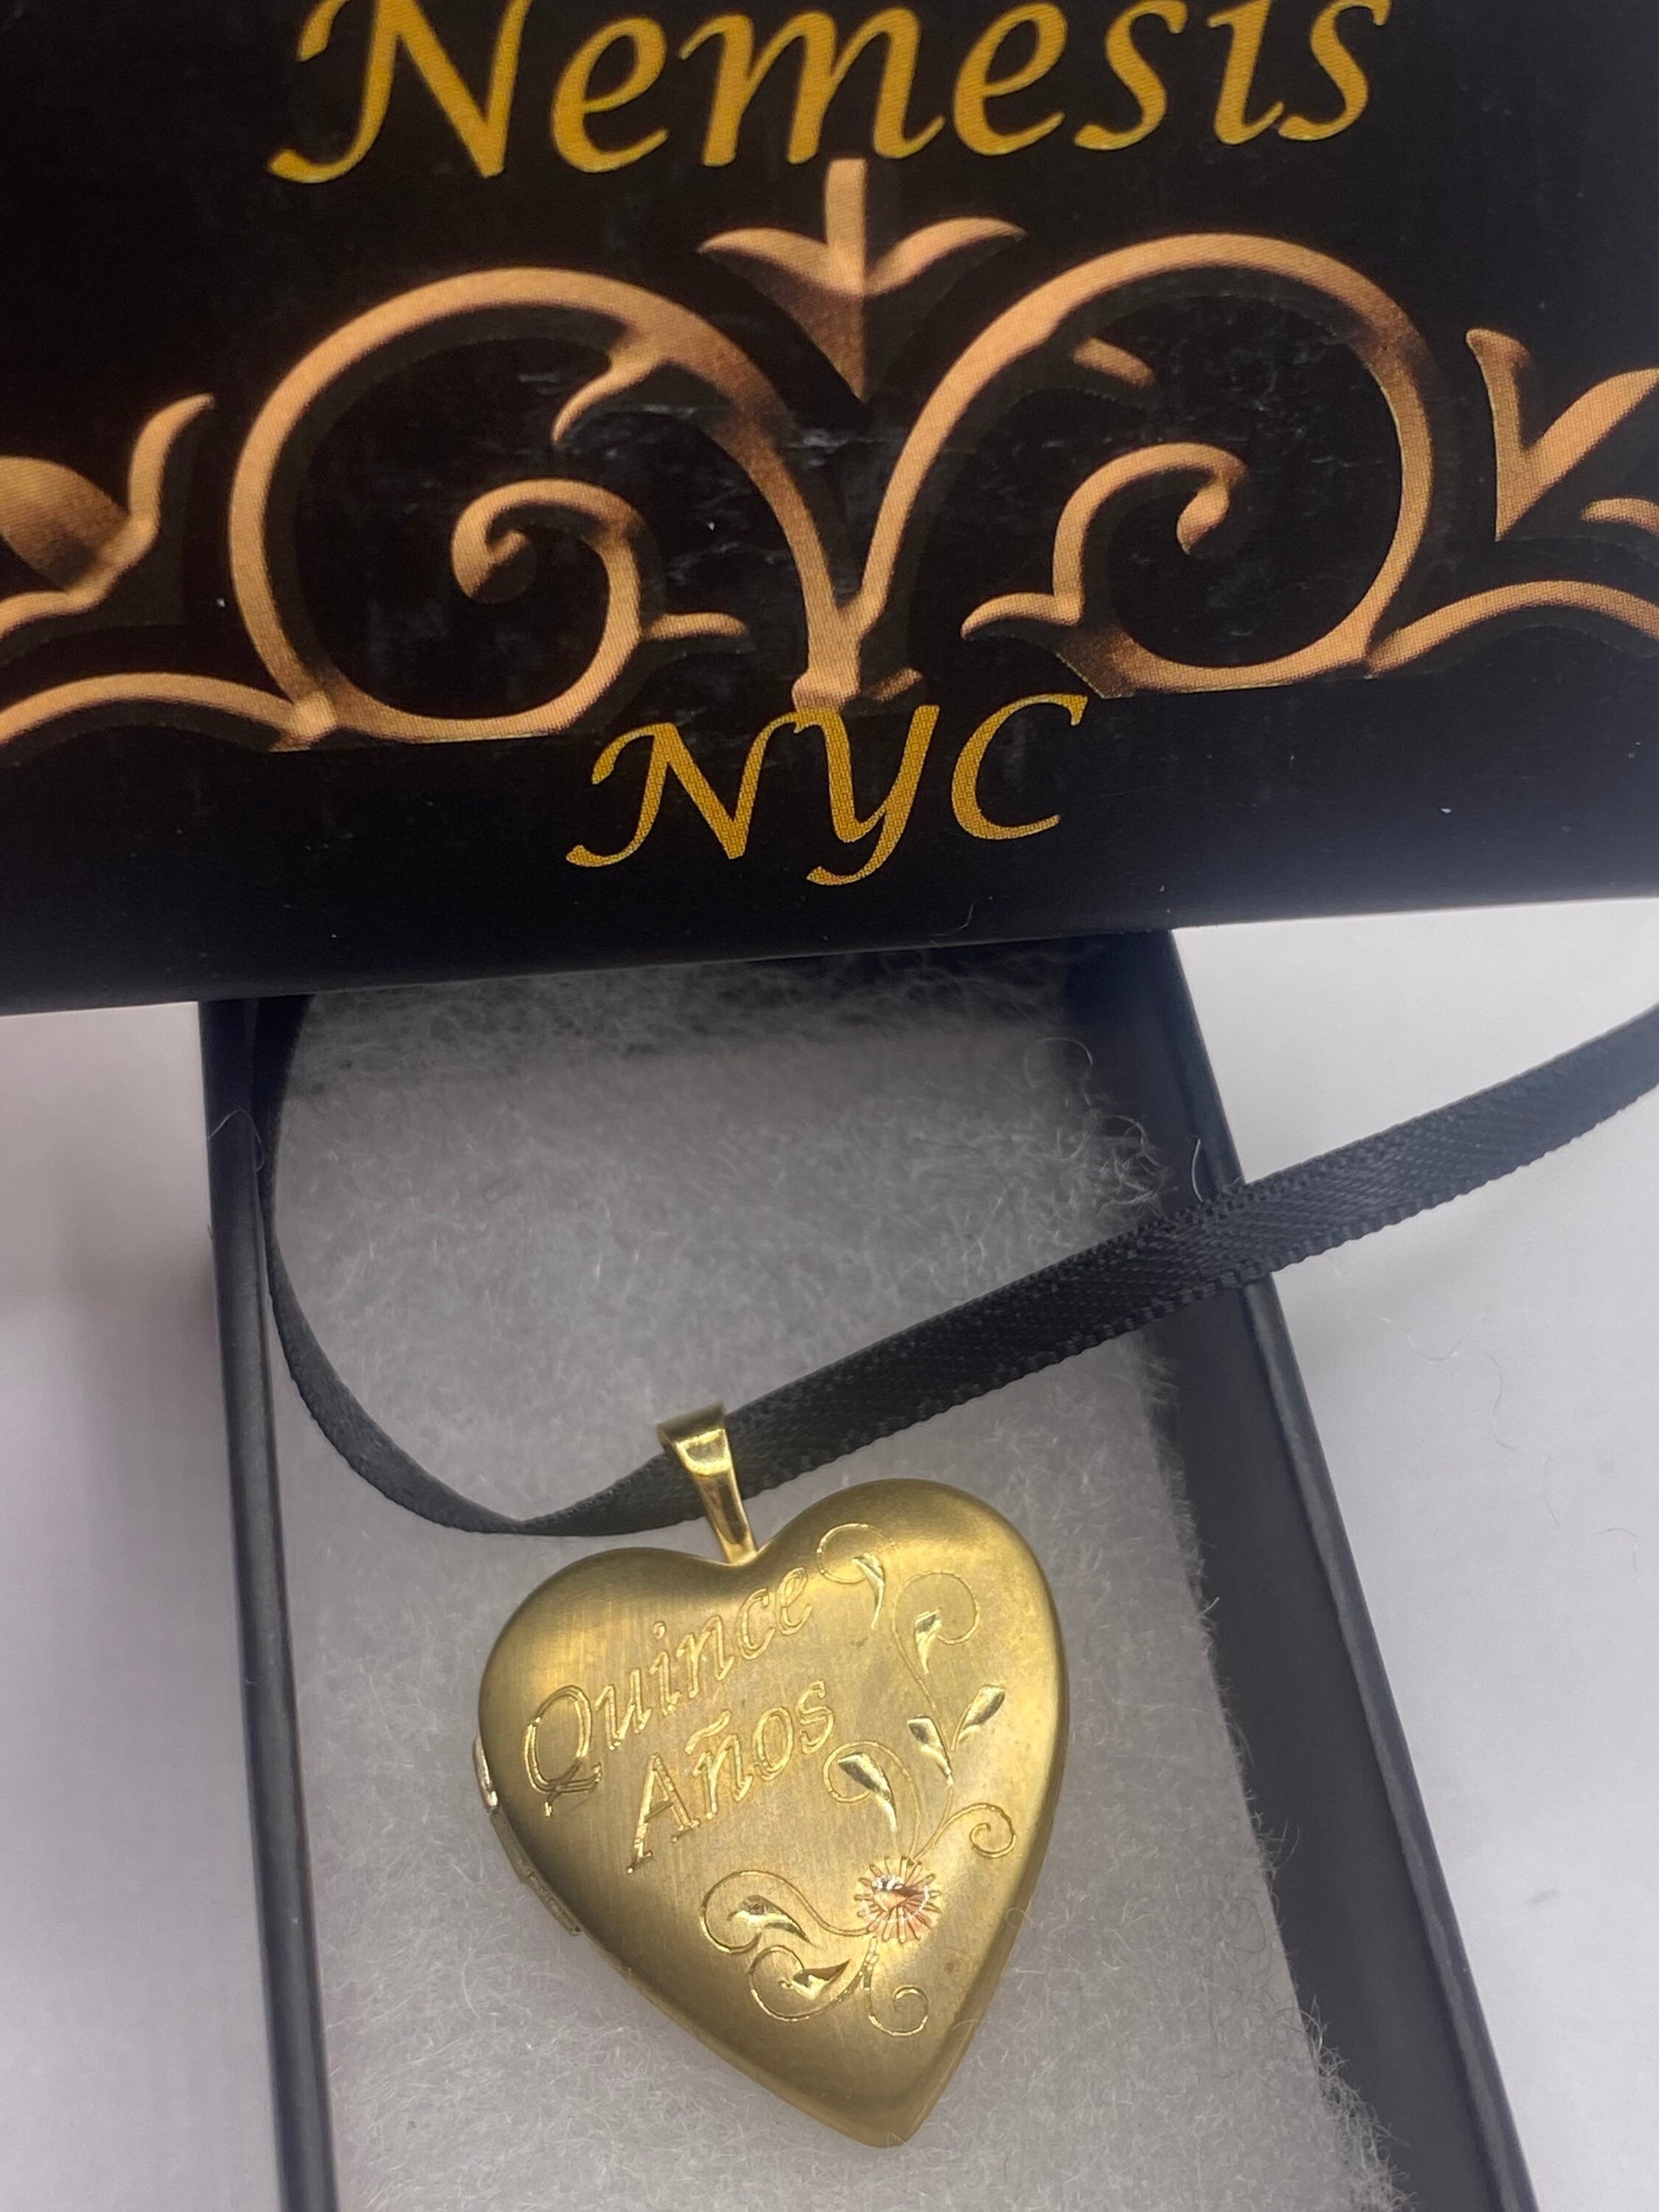 Vintage Gold Locket | Tiny Heart 9k Gold Filled Pendant Photo Memory Charm Engraved "Quince Anos" Quinceañera Birthday | Choker Necklace